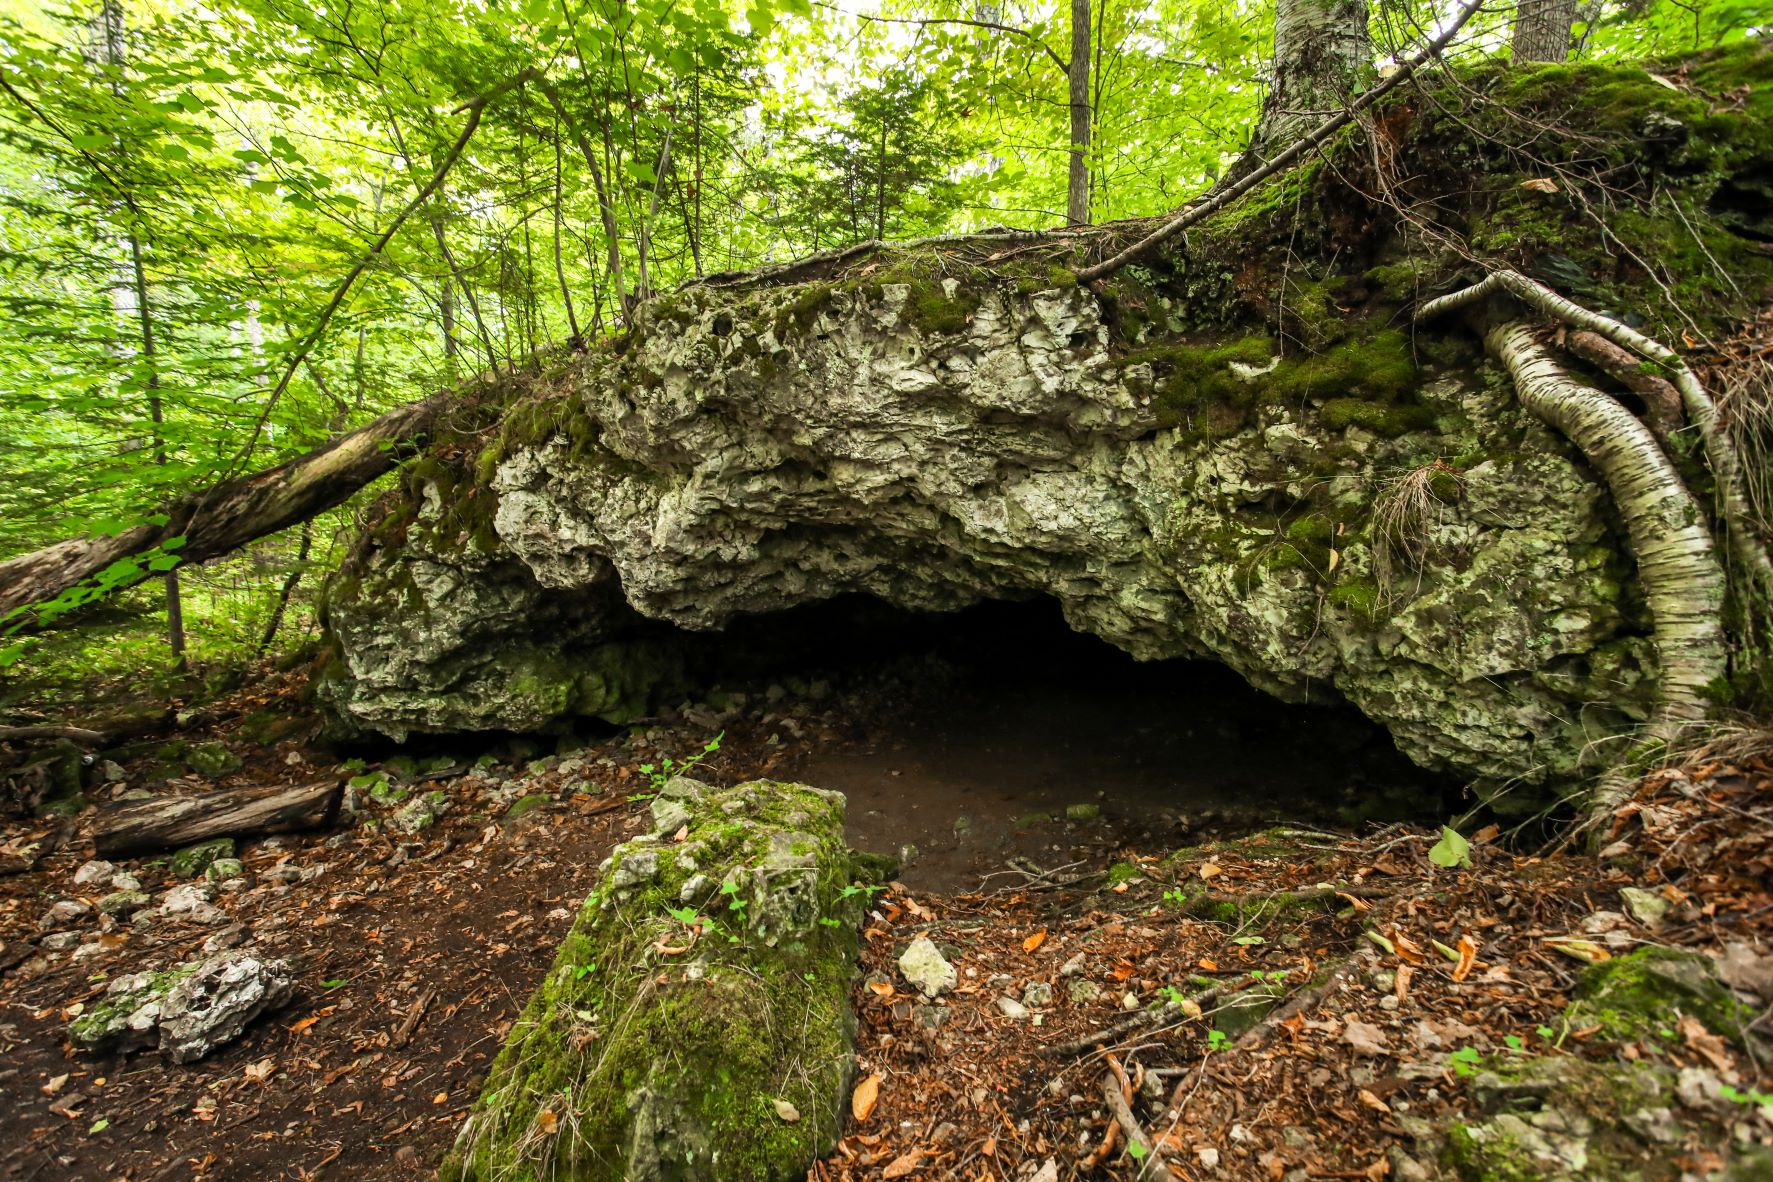 The mouth of Mackinac Island's Cave of the Woods opens to the forest inside Mackinac Island State Park